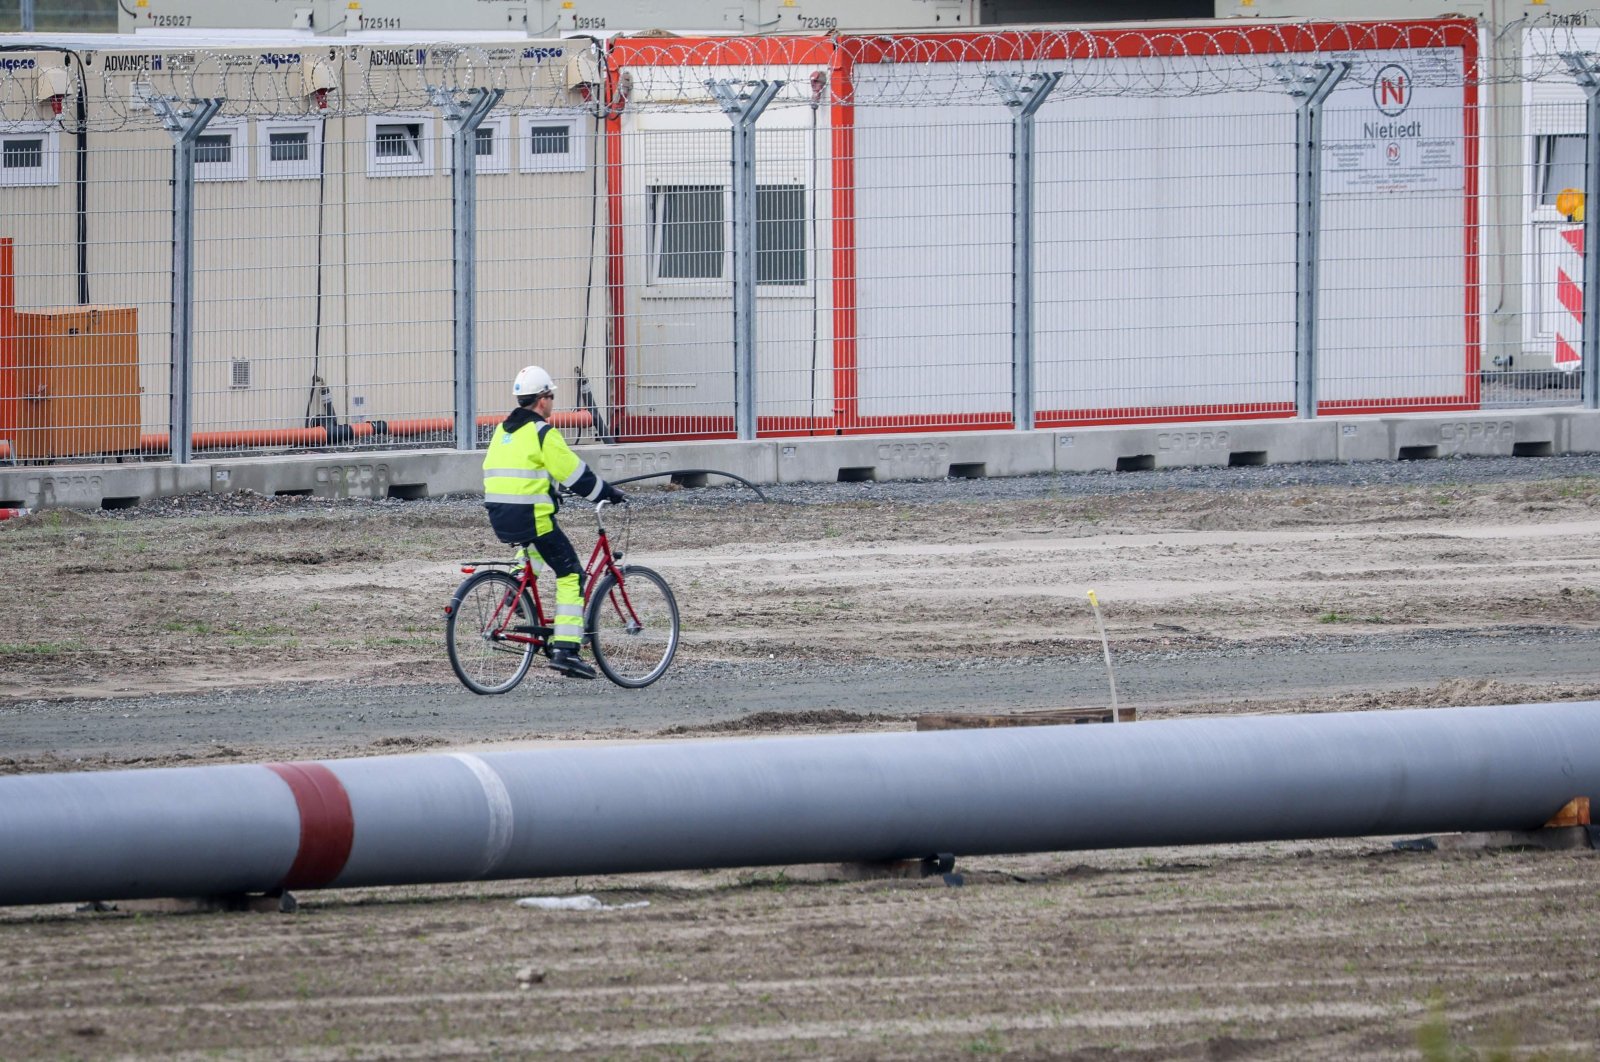 A worker rides a bike next to a pipeline at the landside construction site of the Uniper Liquefied Natural Gas (LNG) terminal at the Jade Bight in Wilhelmshaven on the North Sea coast, northwestern Germany, Sept. 29, 2022. (AFP Photo)